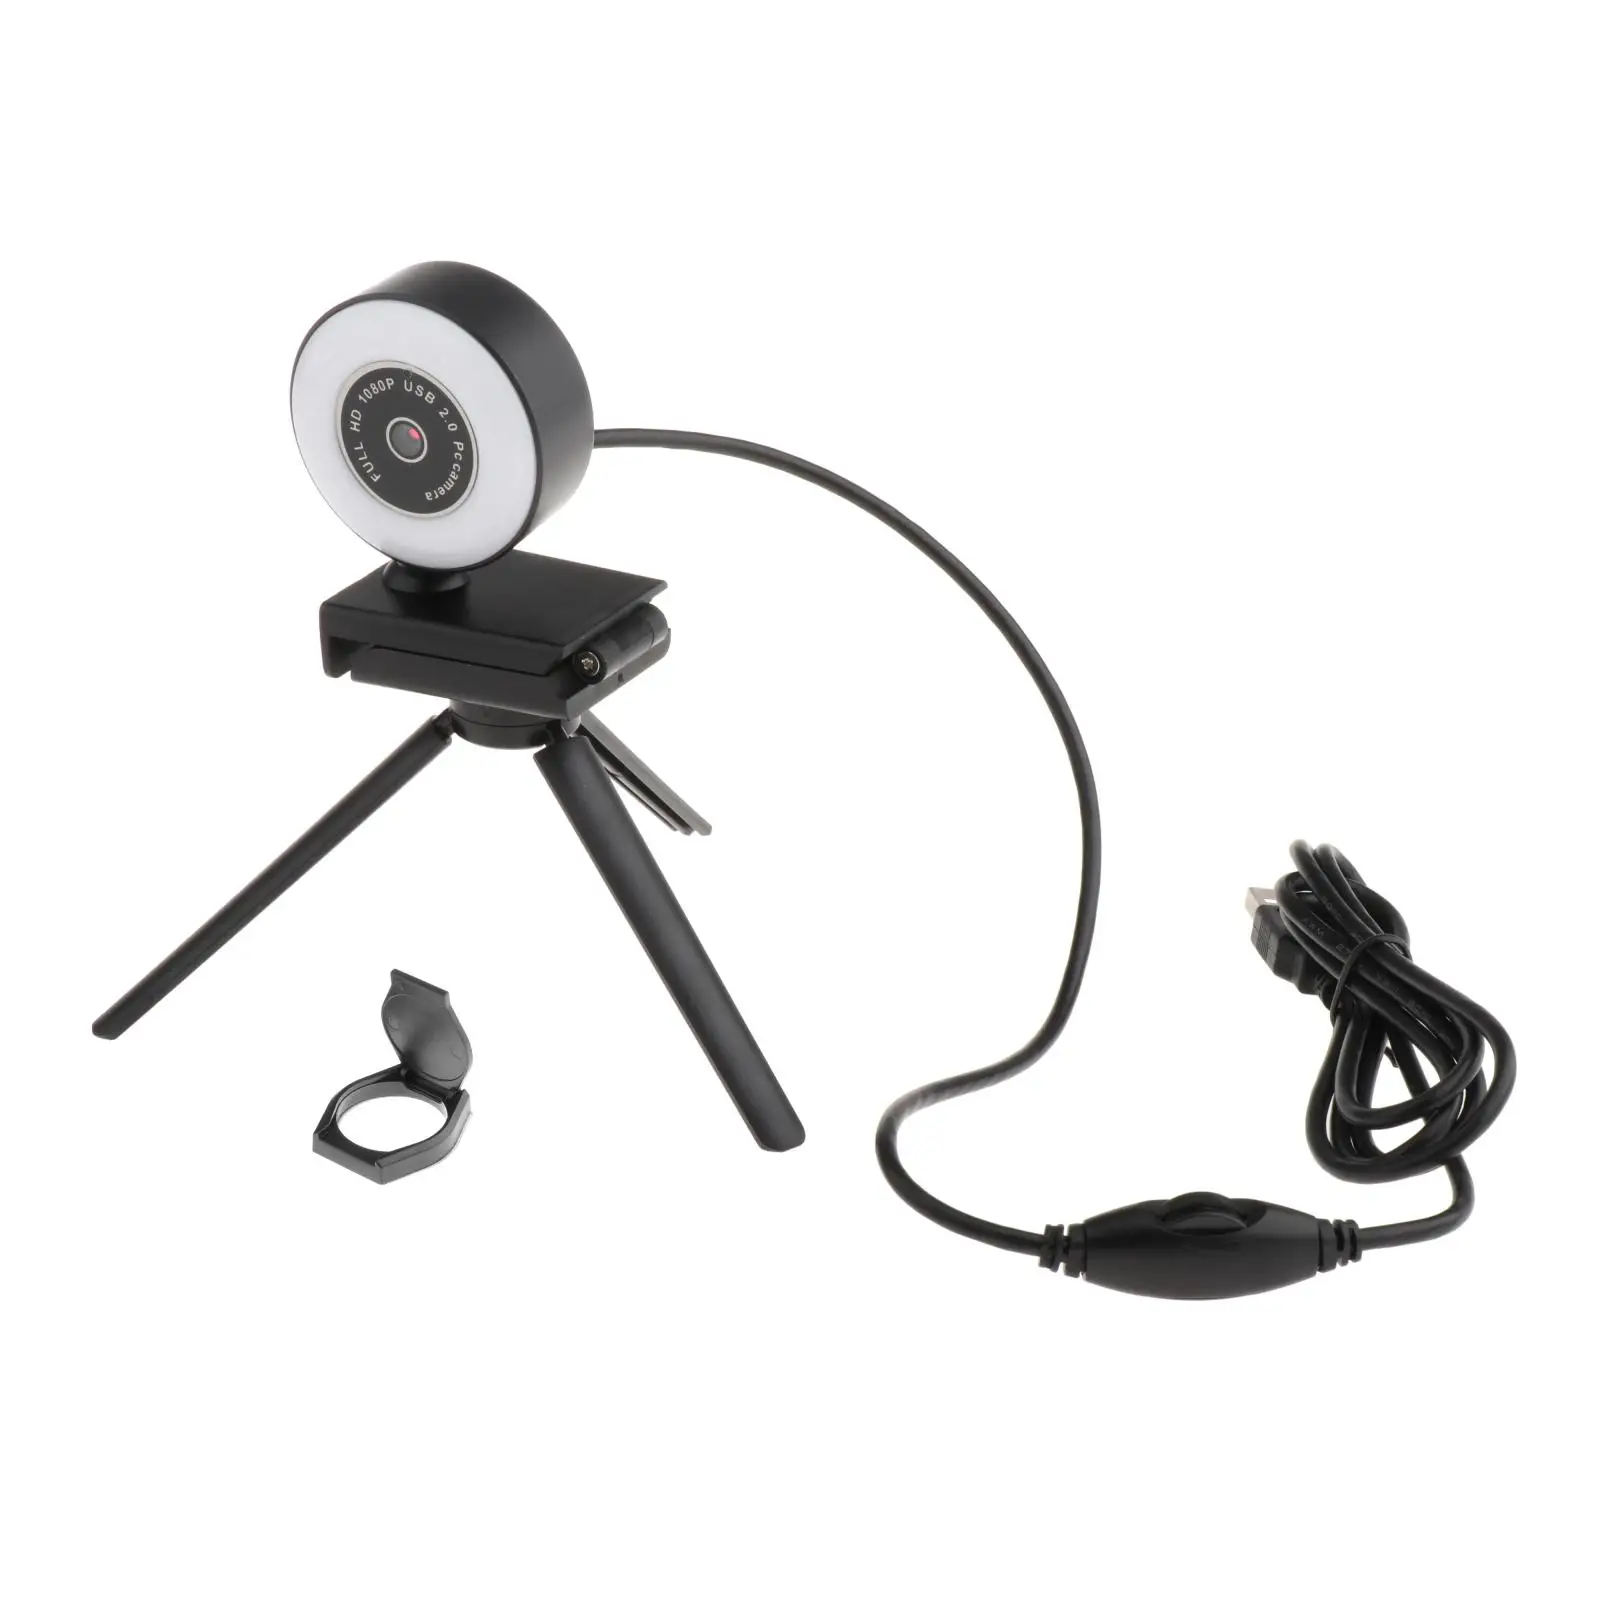 HD USB Webcam for Desktop Laptop Video Record with Microphone   Light